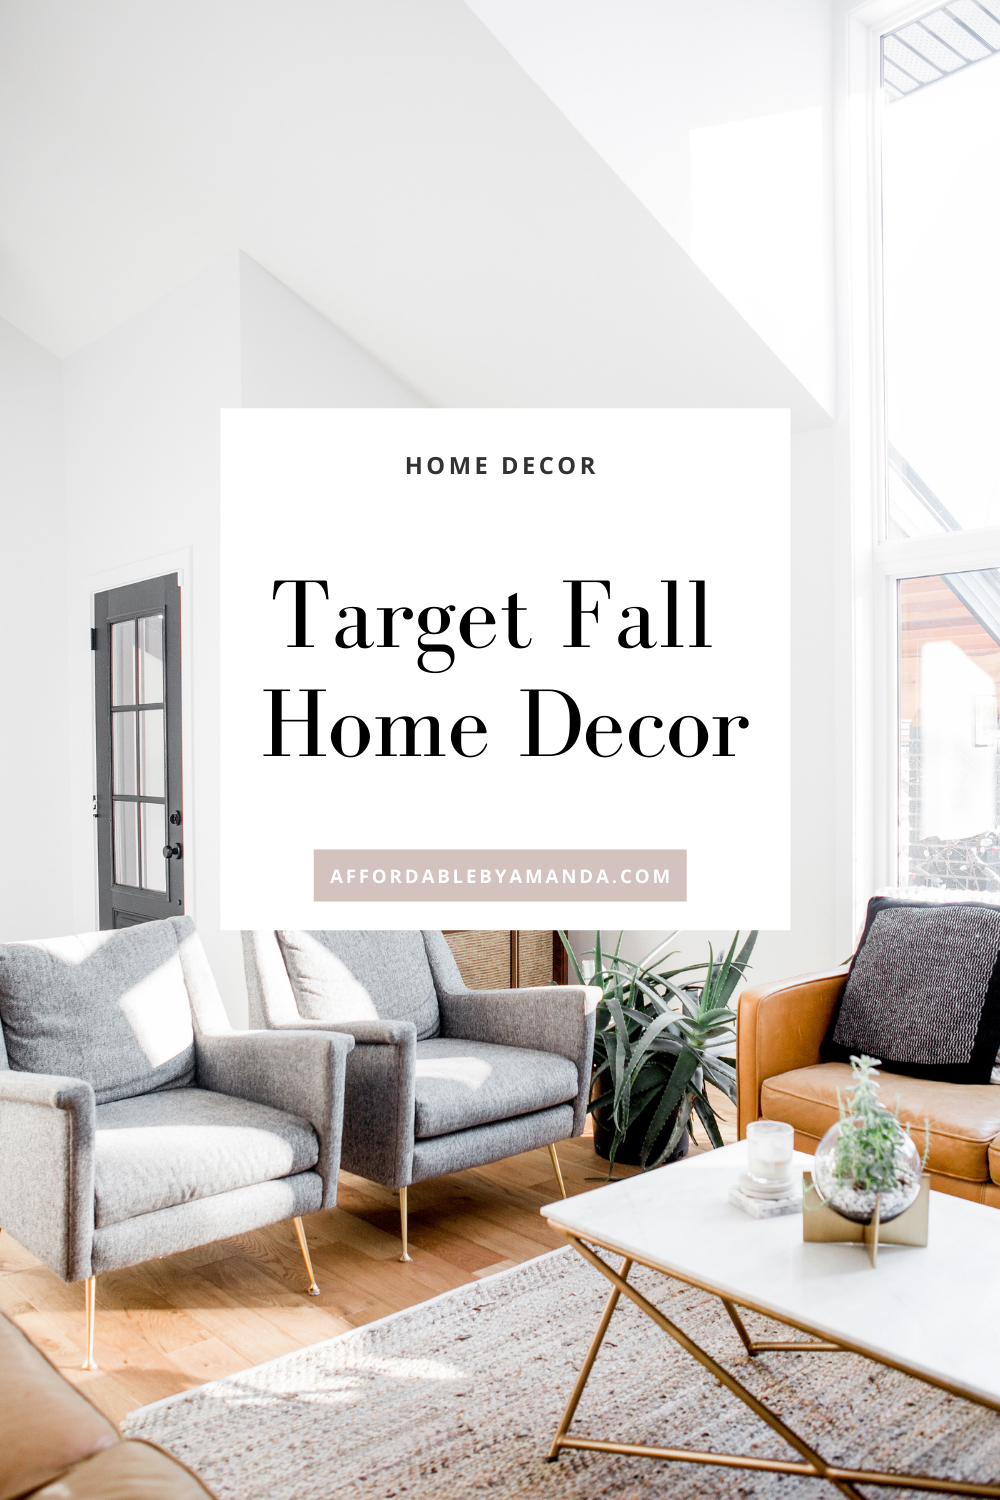 Target Fall Home Decor 2021 - Affordable by Amanda